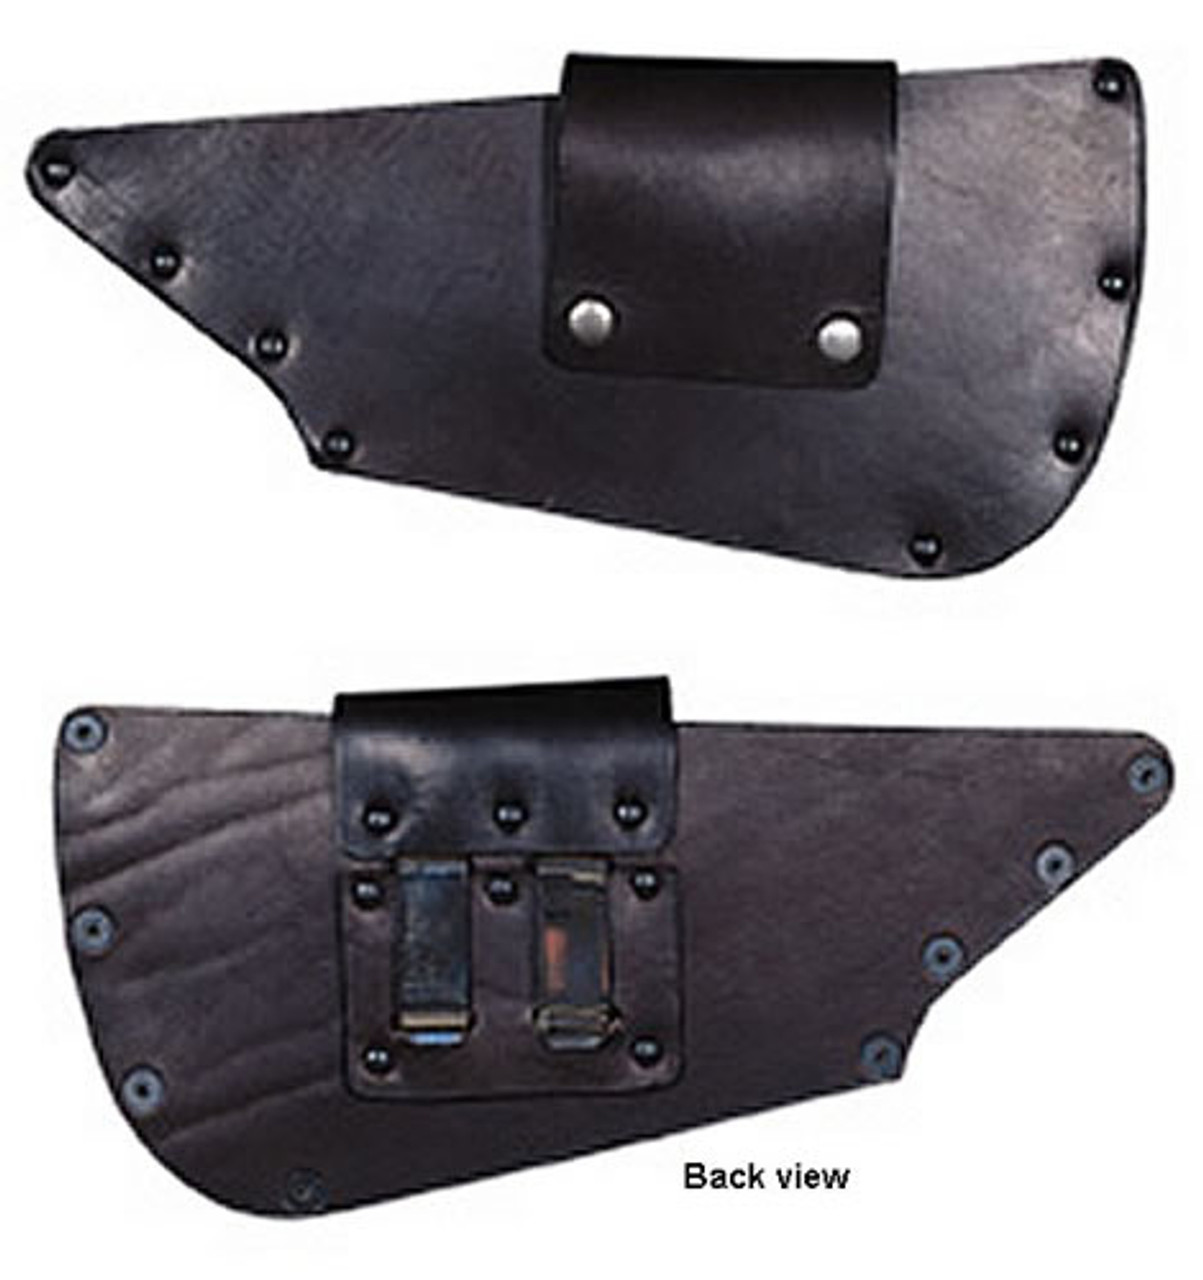 Stitched Gear, Leather Belts Axe Covers, Knife and Gun Holsters